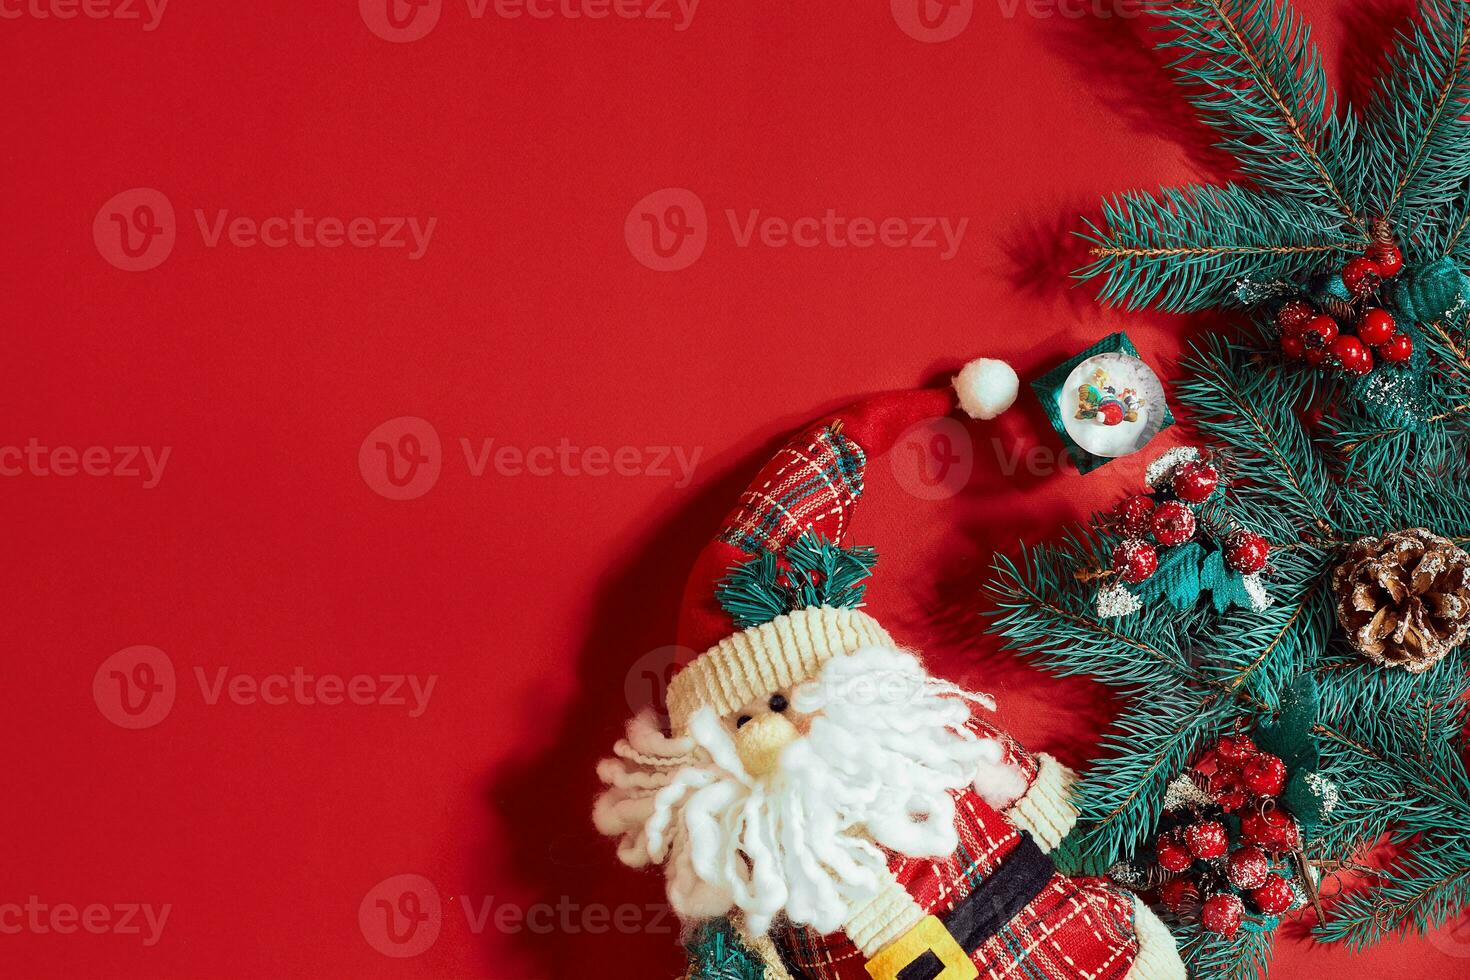 Christmas decorations on hot red background. Christmas and New Year theme. Place for your text, wishes, logo. Mock up. photo